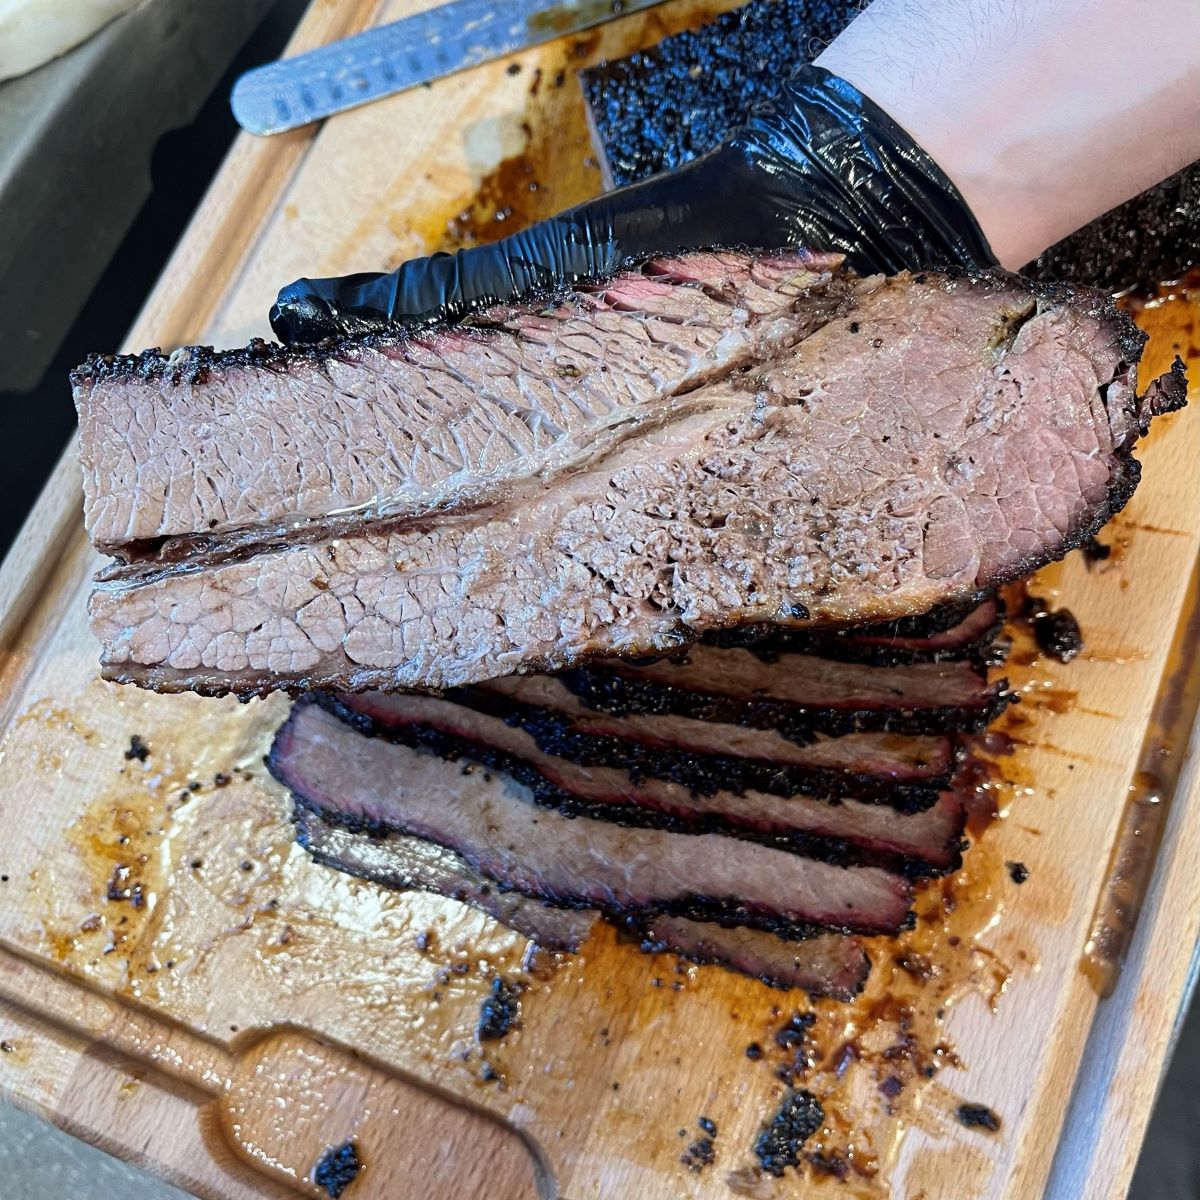 Hot and fast vs low and slow brisket